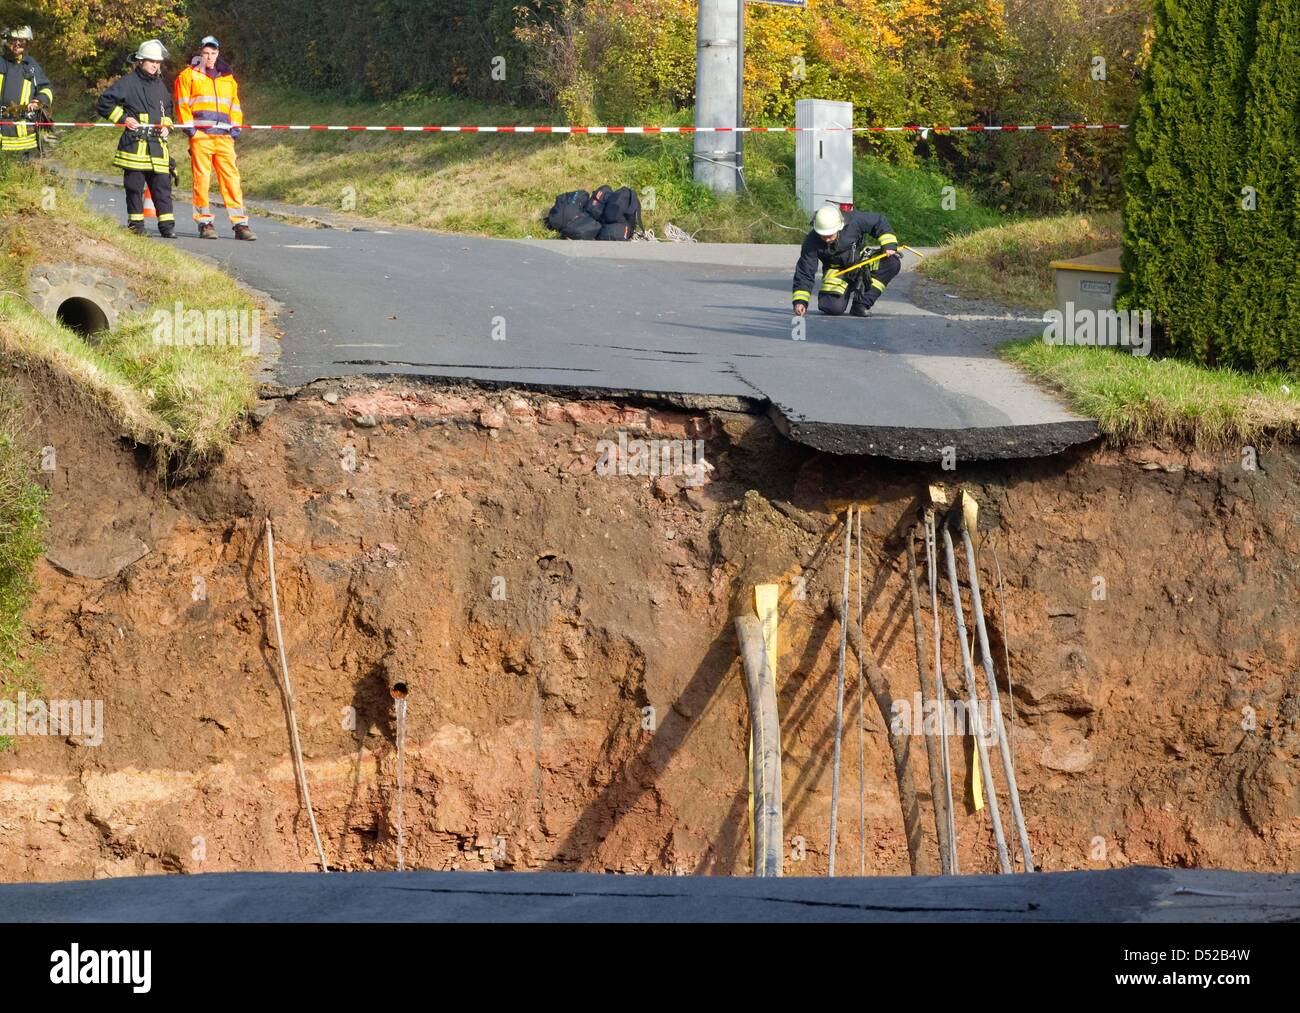 Firemen secure the perimeter of a sinkhole that has left a huge crater in the middle of a residential area in Schmalkalden, Germany, 01 November 2010. No one was hurt. The hole is about 20 metres deep. Photo: MICHEL REICHEL Stock Photo